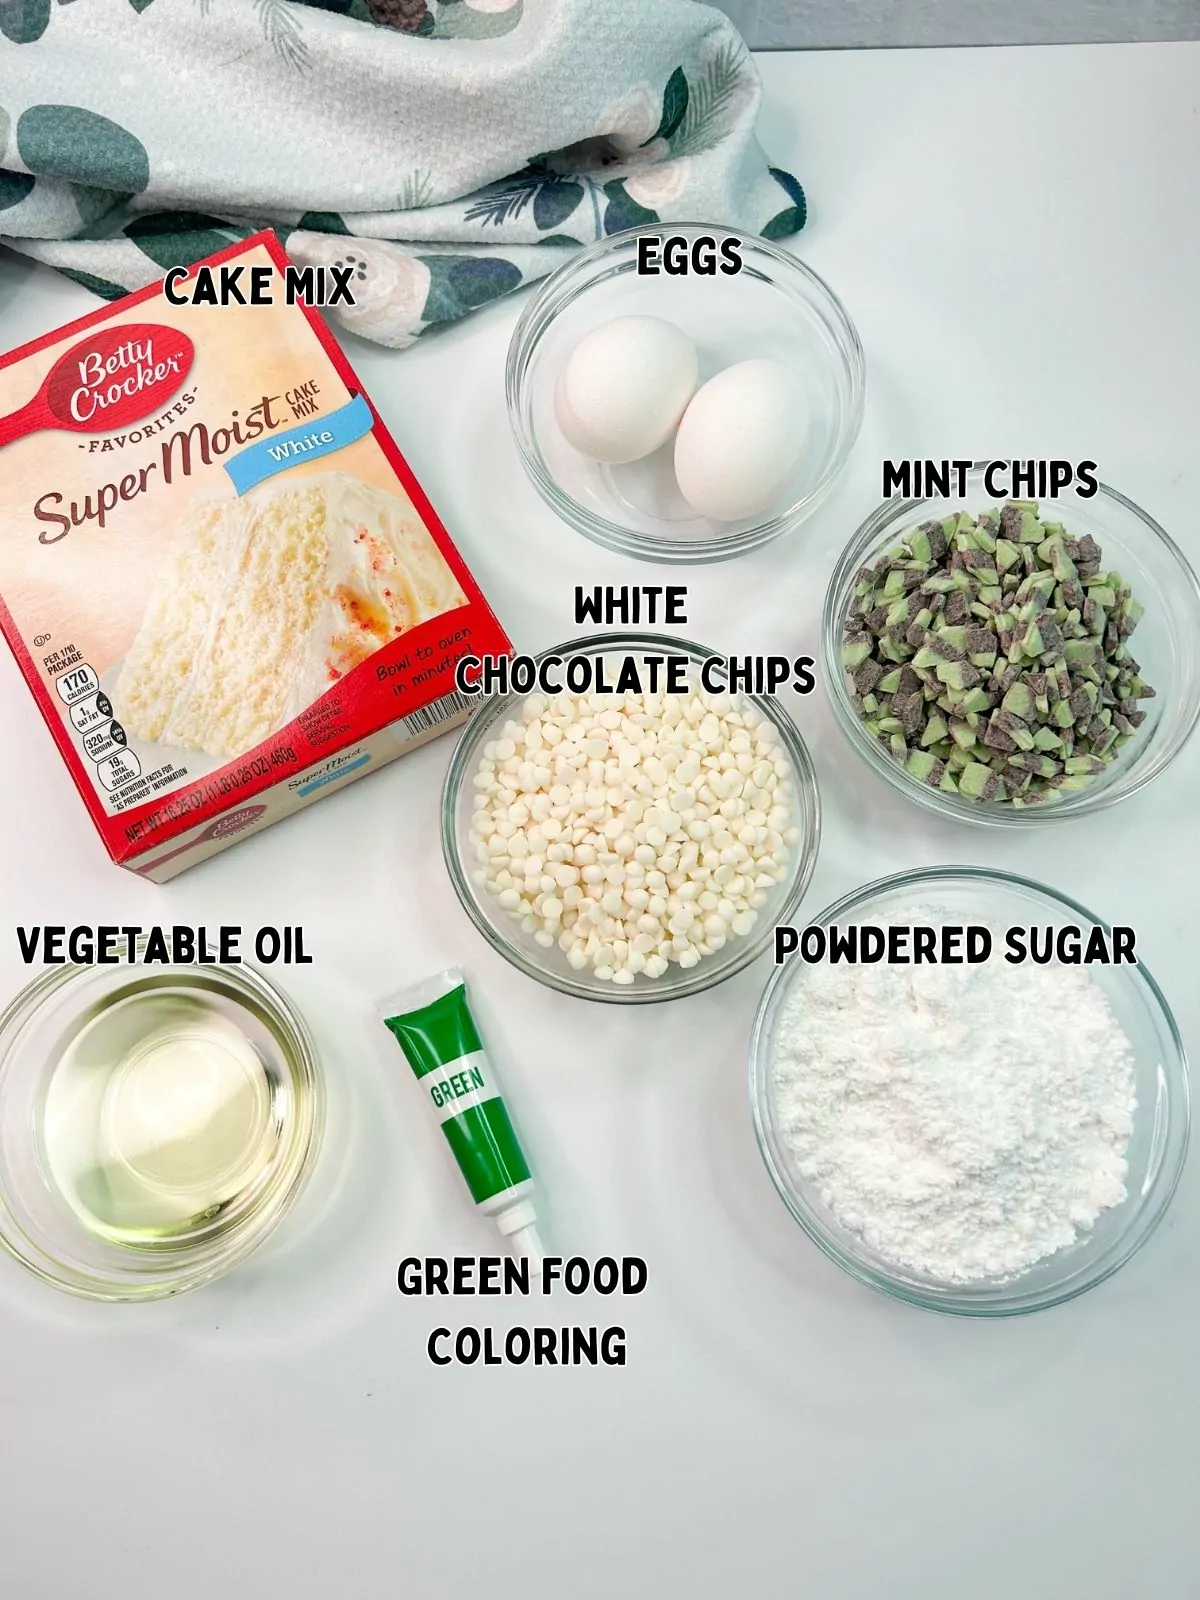 Ingredients for green tinted cake mix cookies.